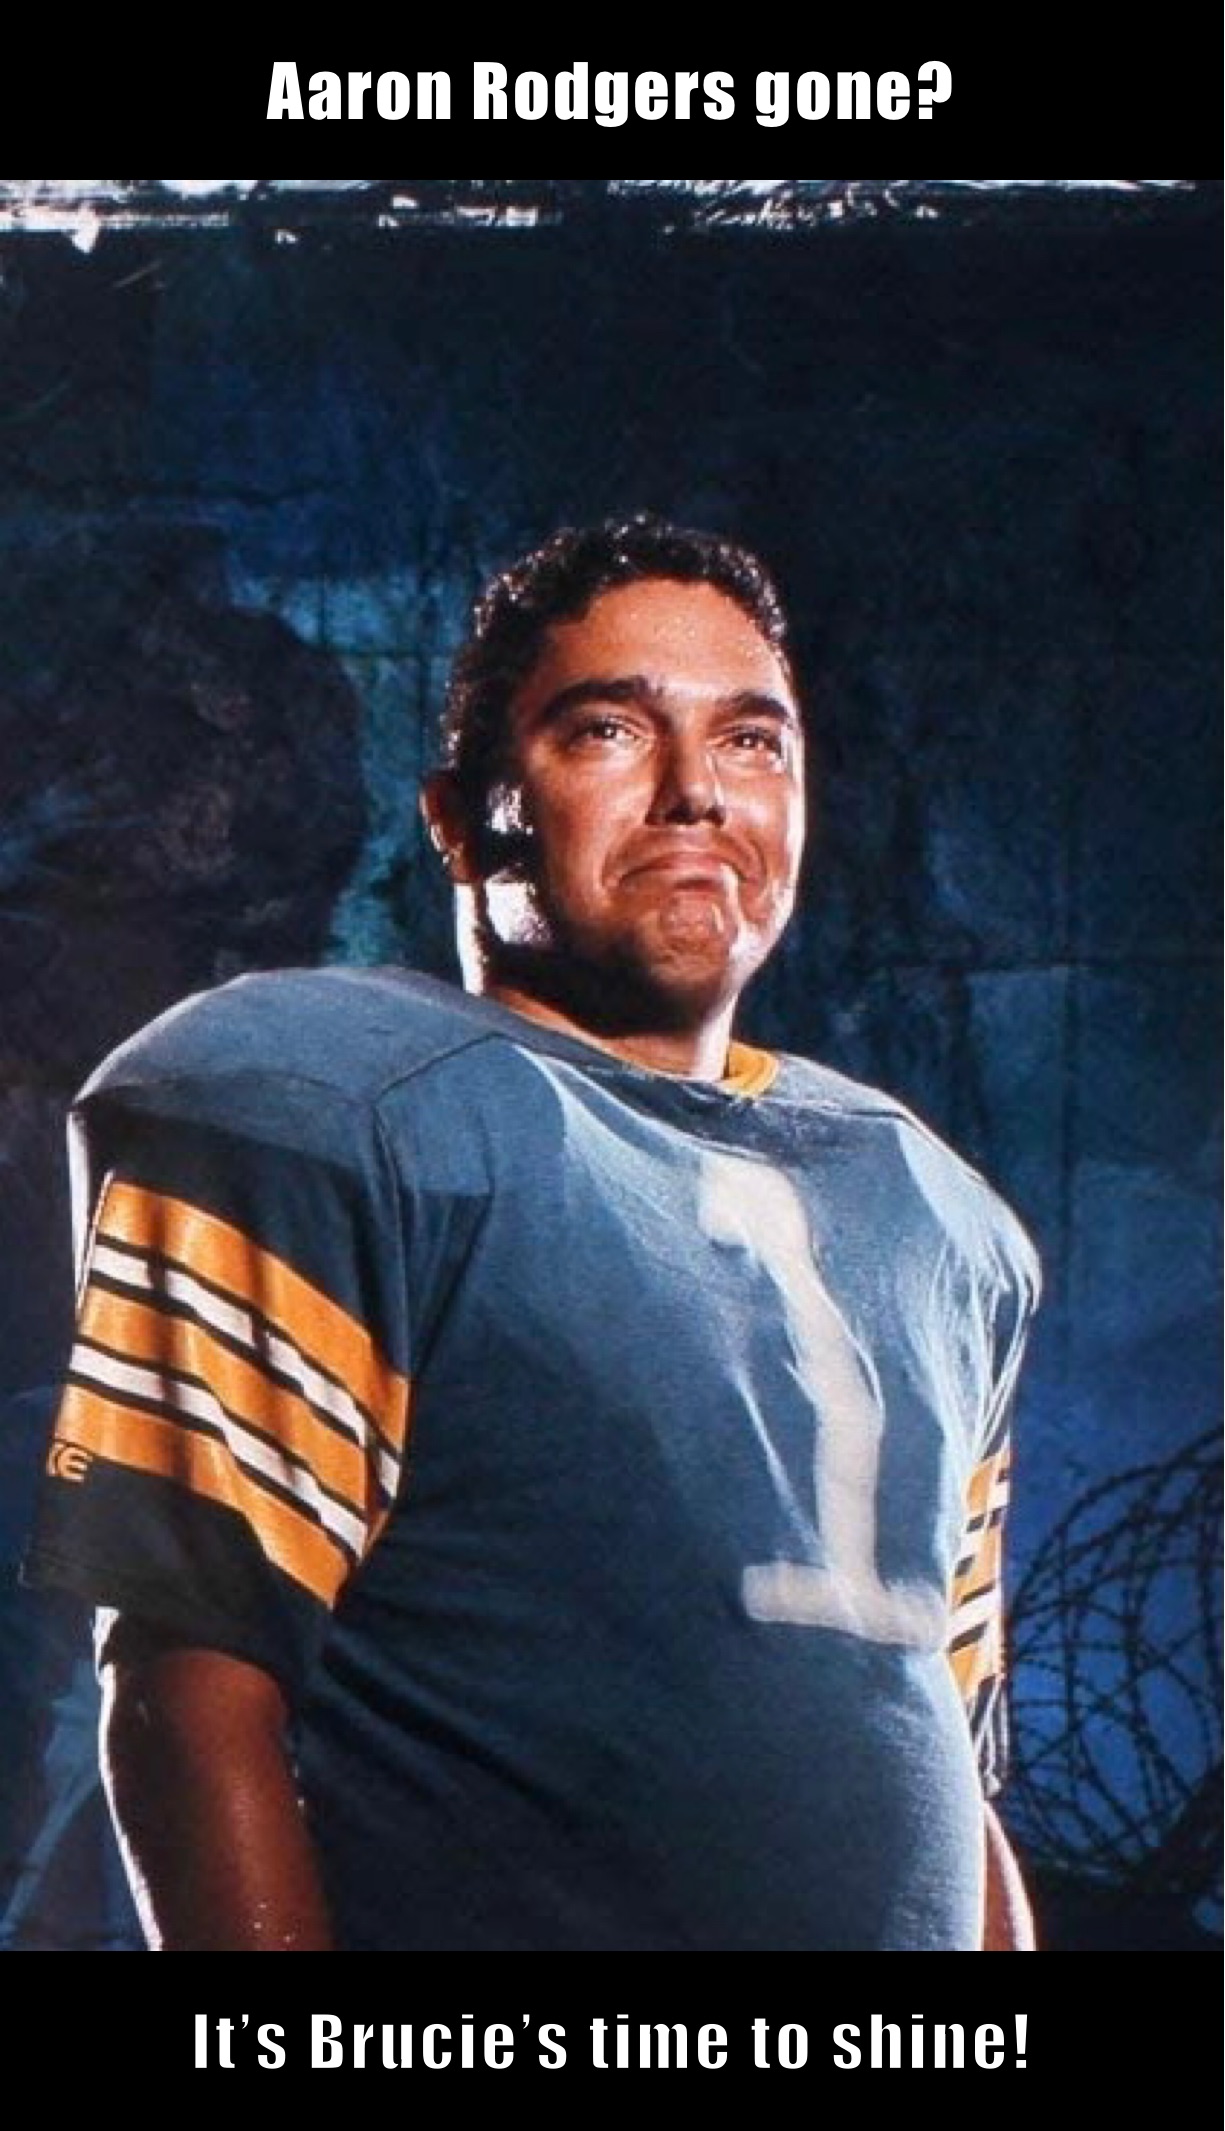 Aaron Rodgers gone? It’s Brucie’s time to shine!